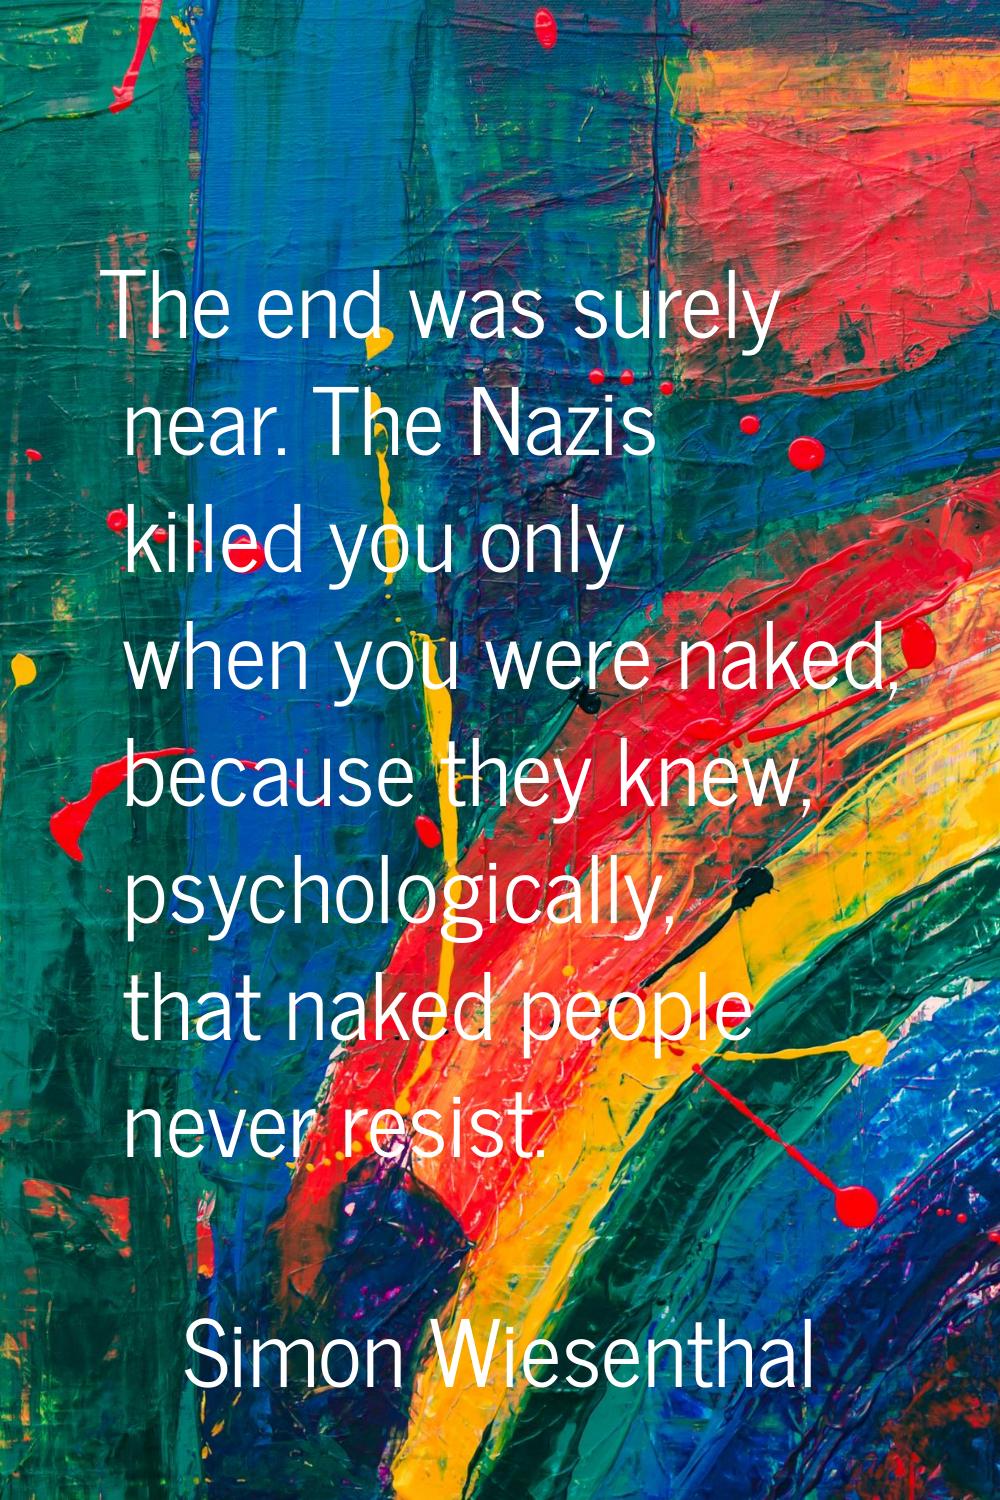 The end was surely near. The Nazis killed you only when you were naked, because they knew, psycholo